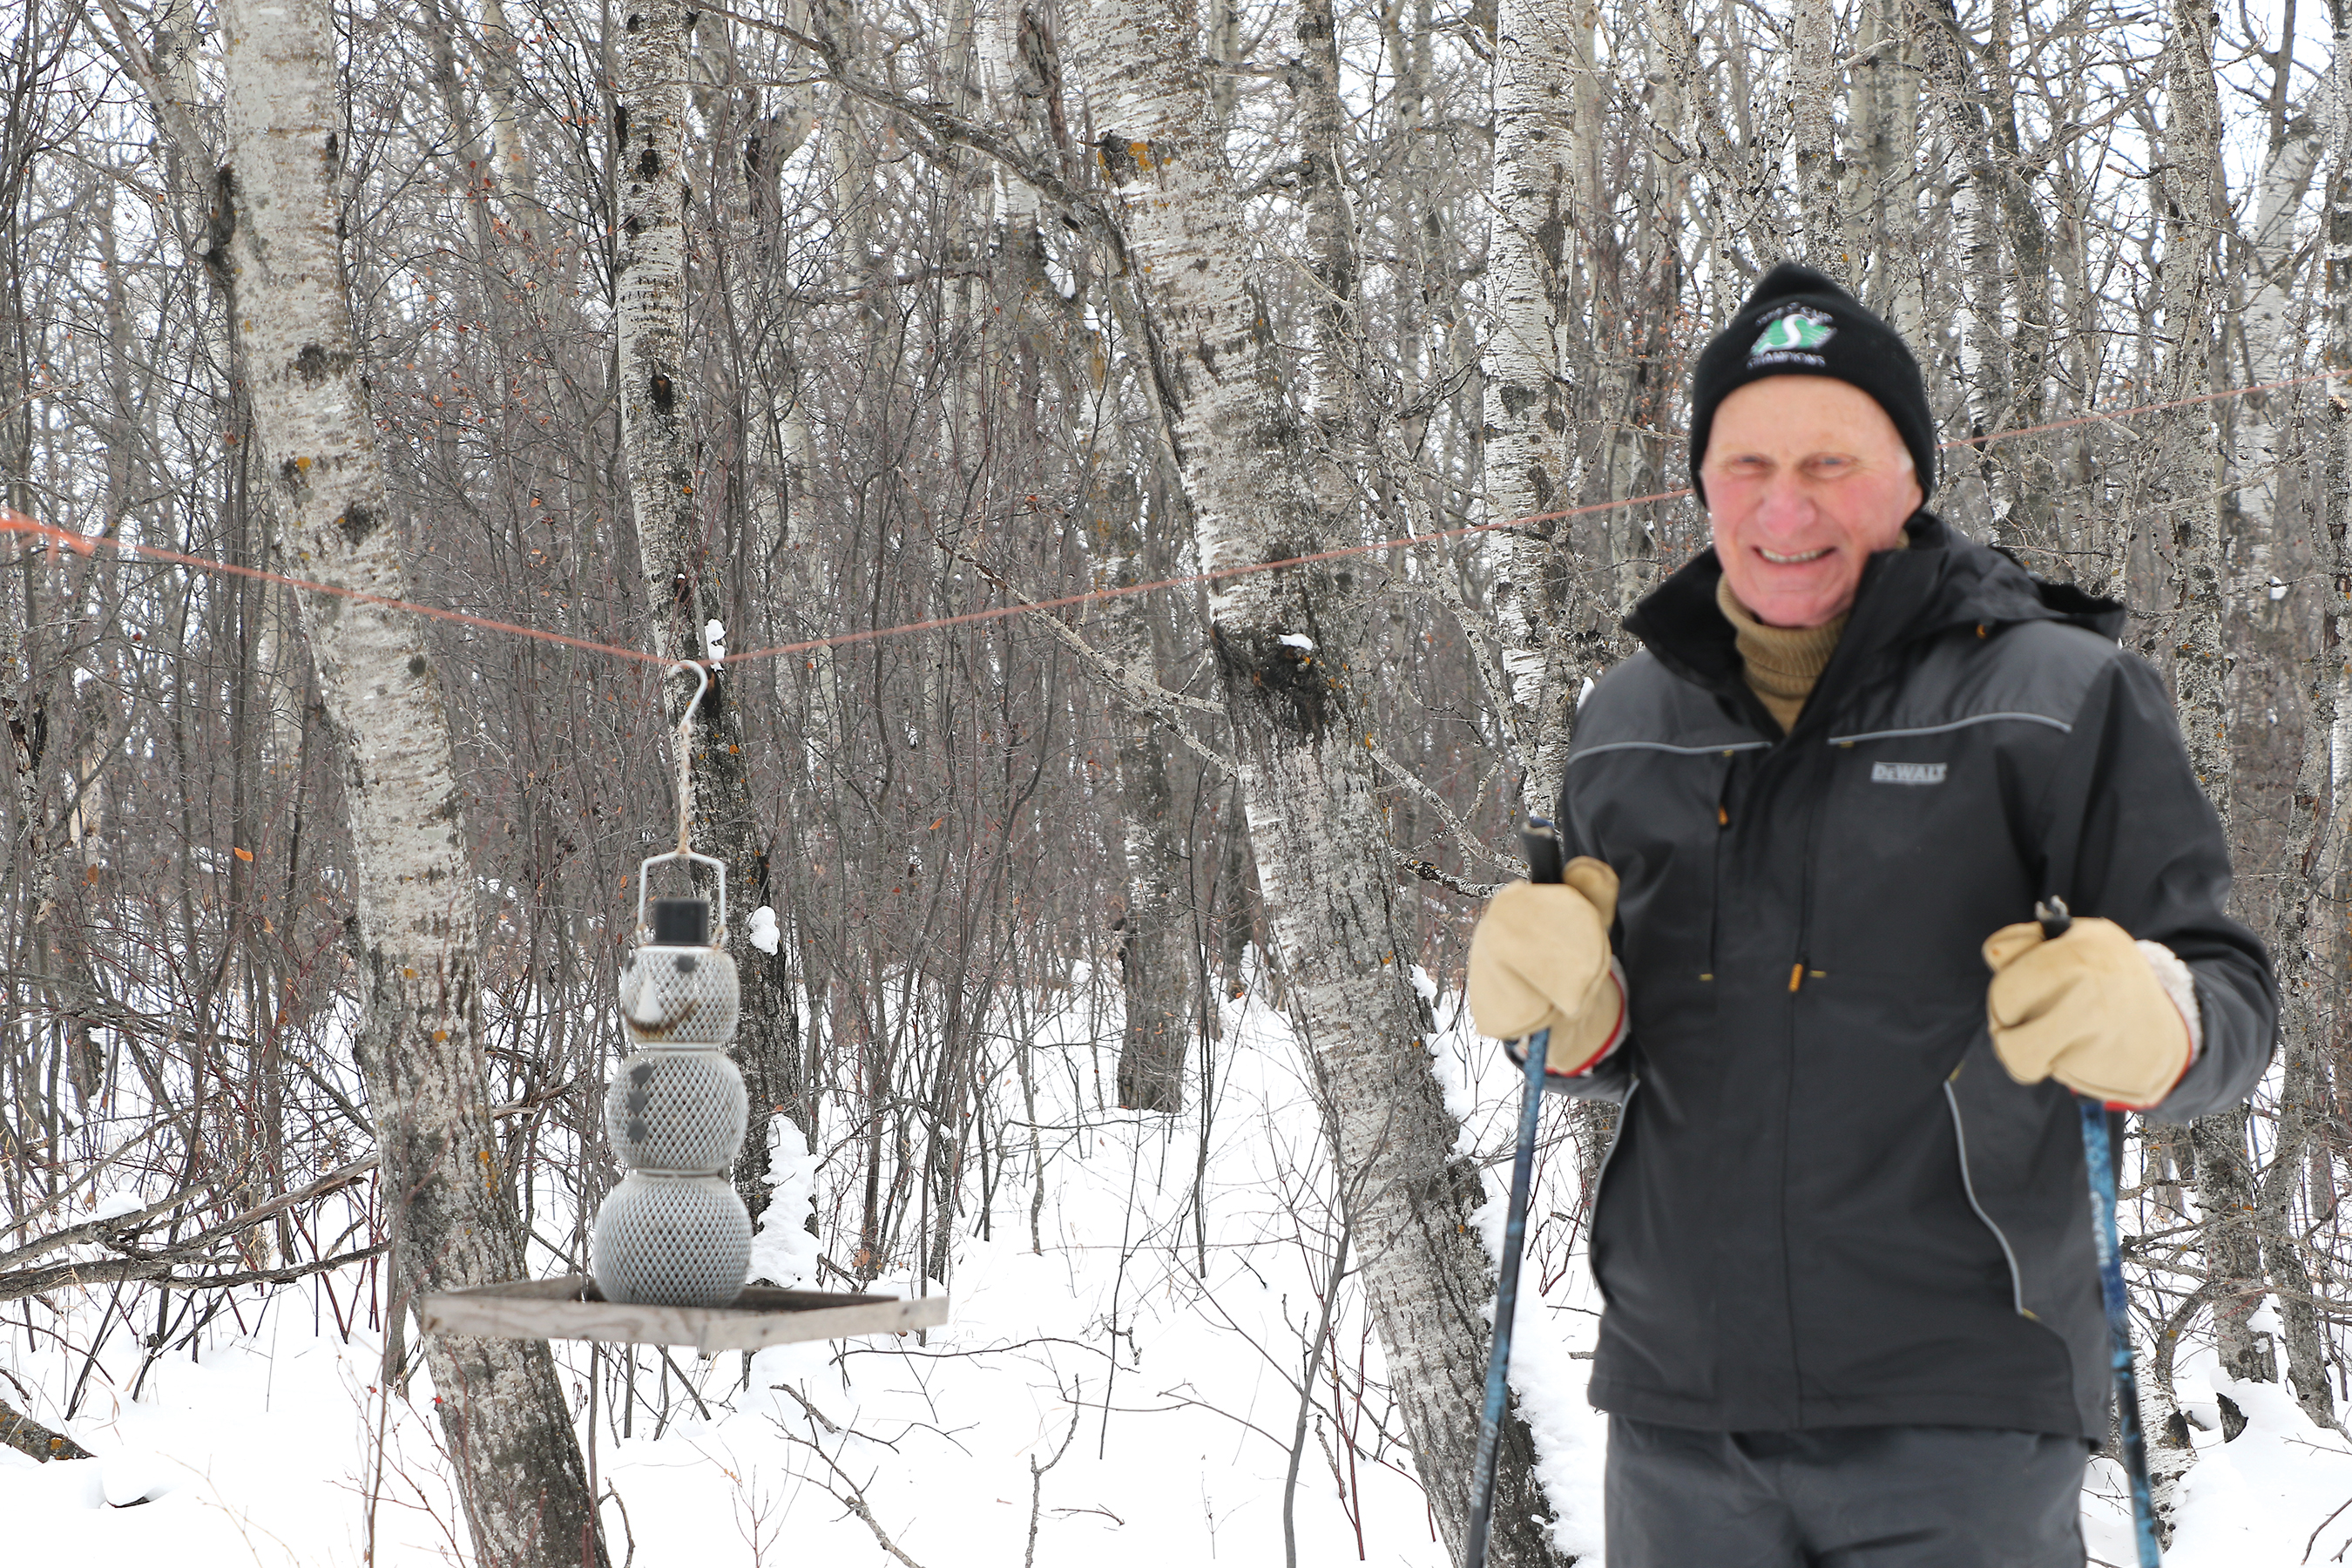 Bird feeders were hung up throughout the different trails of Rocanville Cross-Country Ski Trails. Dennis Hack, the equipment co-ordinator for the club, says his favorite bird feeder is the feeder that’s shaped like a snowman. 